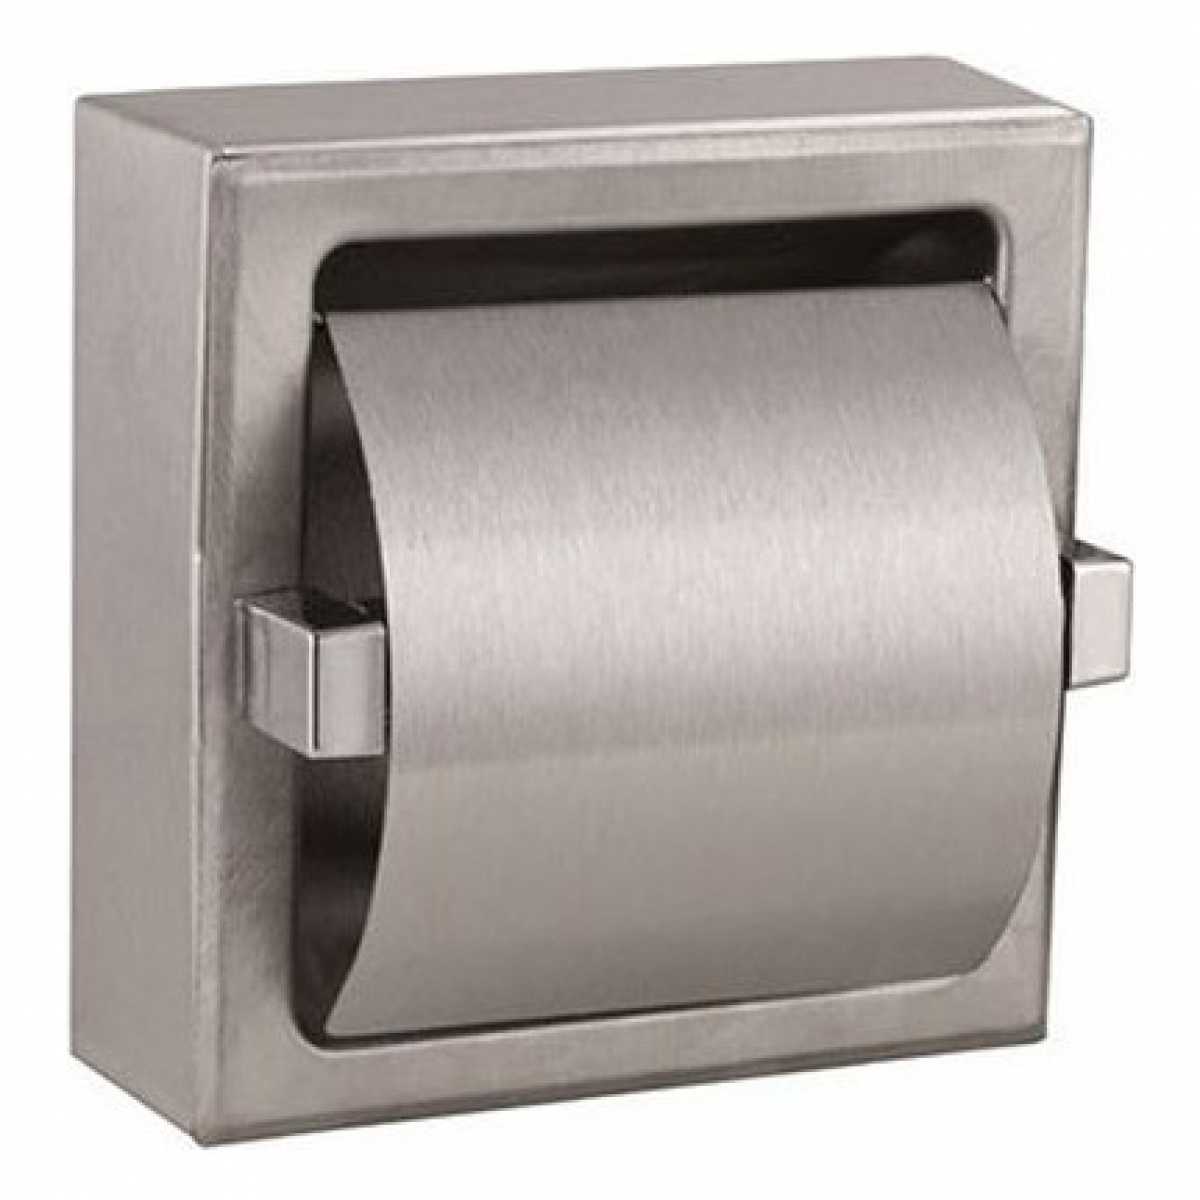 Toilet Roll Holder Non-recessed, Single